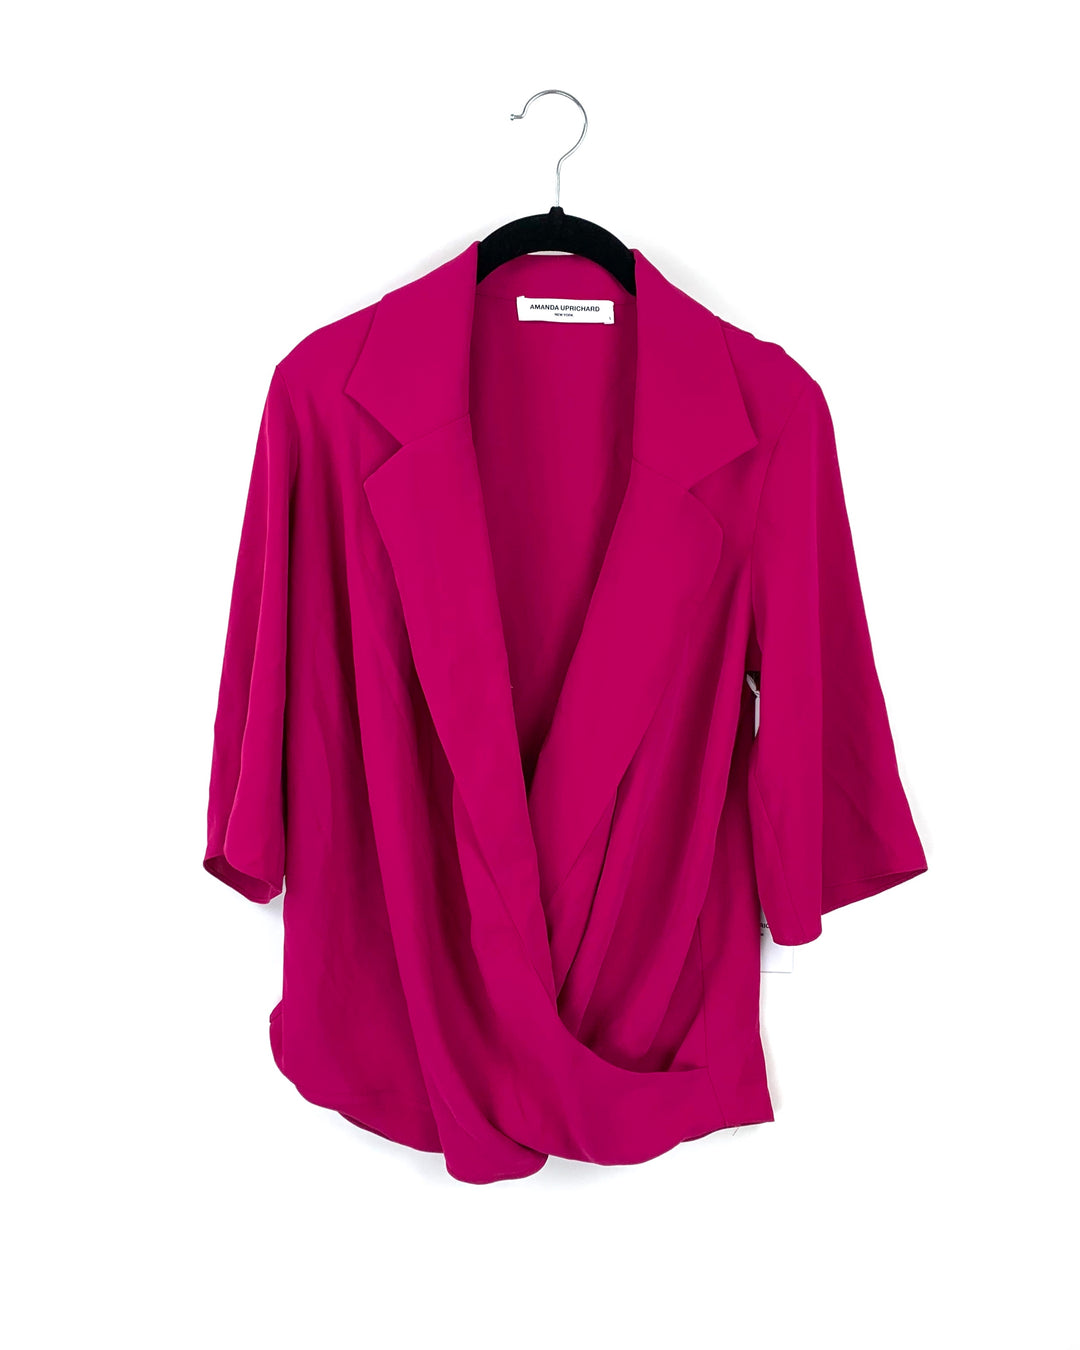 Magenta Collared Blouse - Small